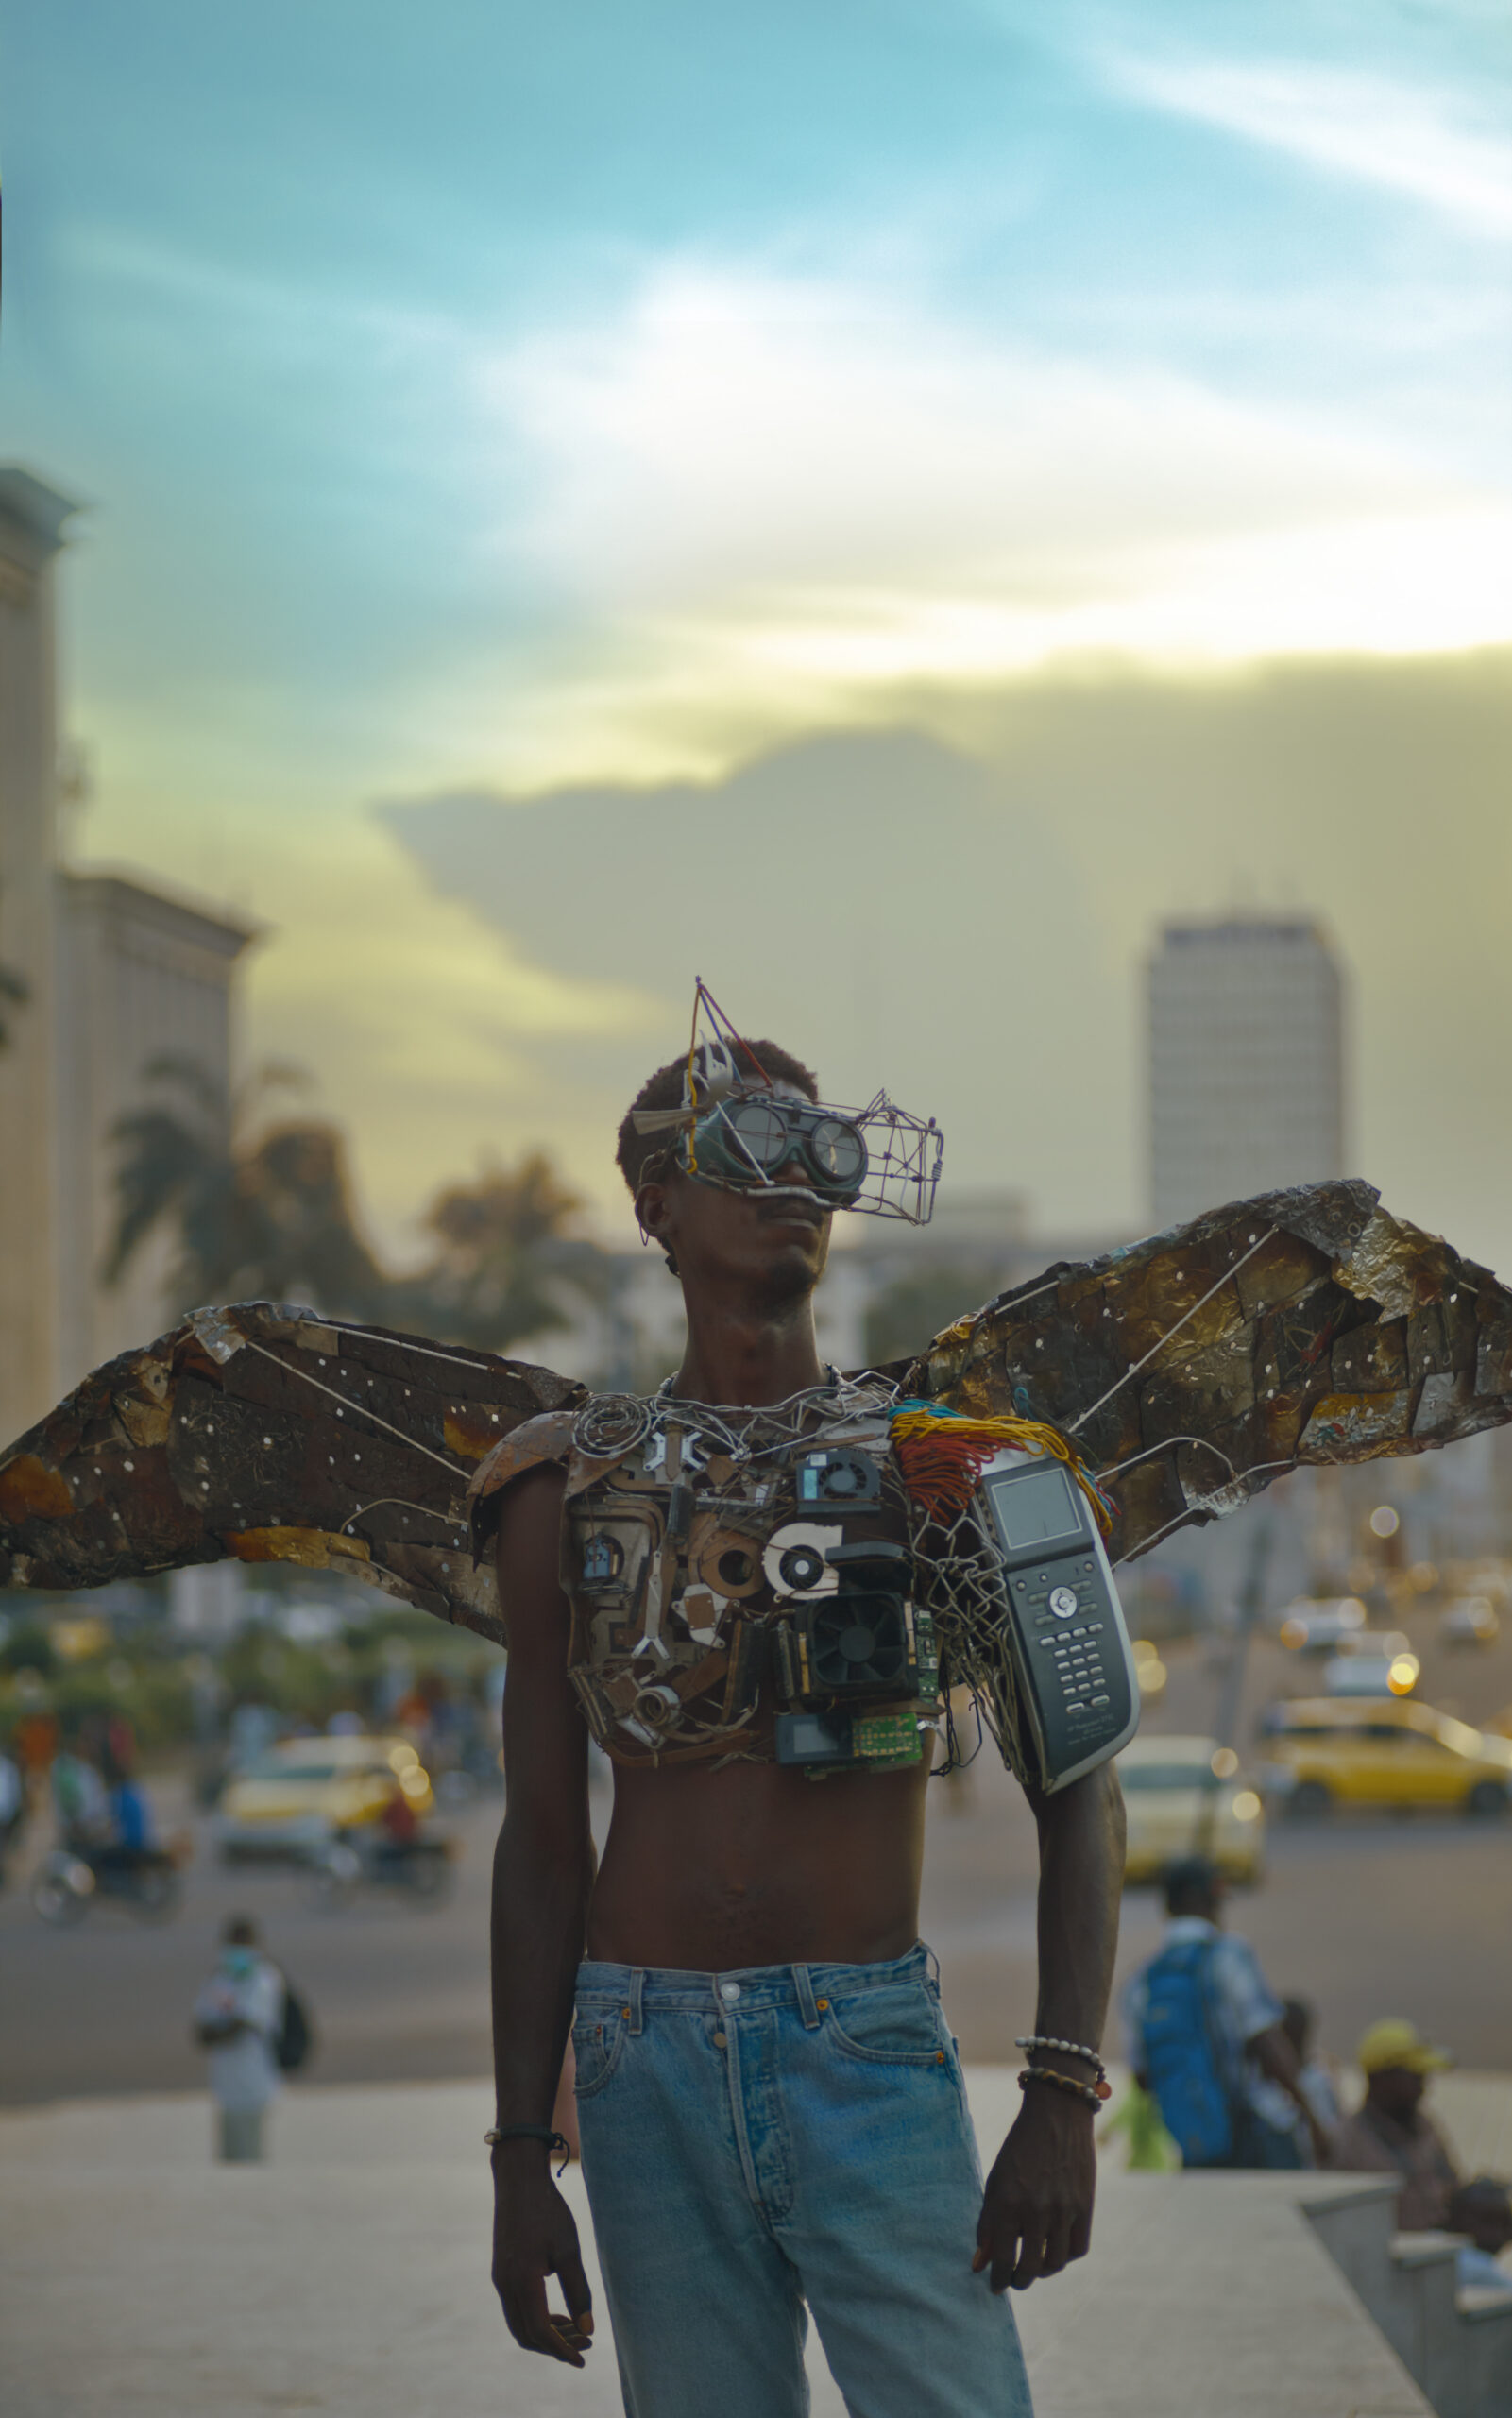 Man poses with wings made out of disused metal and electronics. 